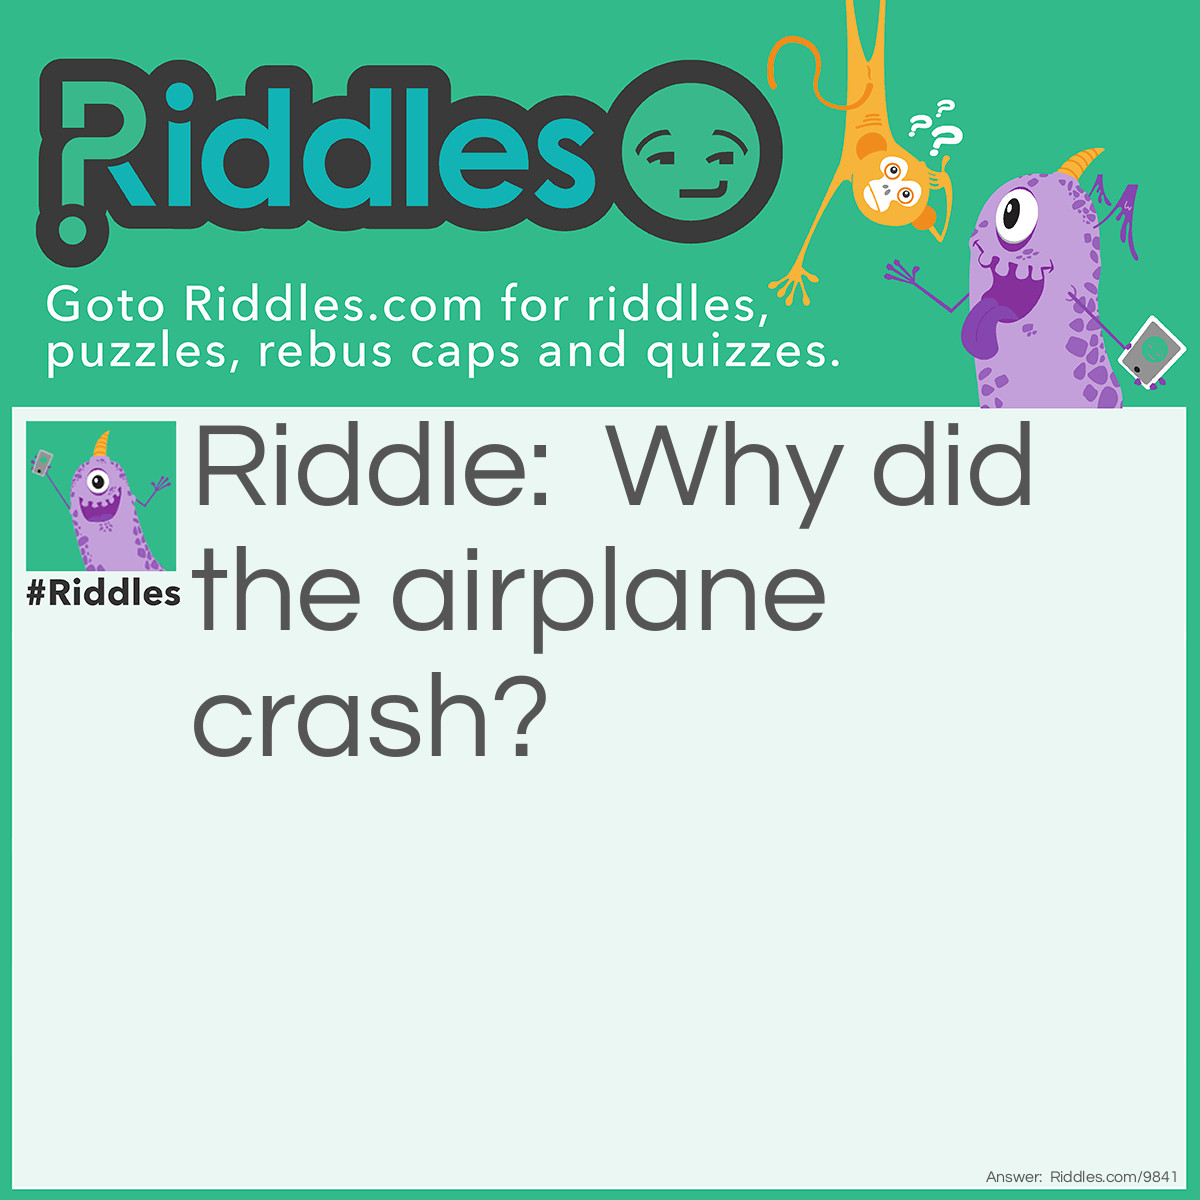 Riddle: Why did the airplane crash? Answer: Because the pilot was a loaf of bread.